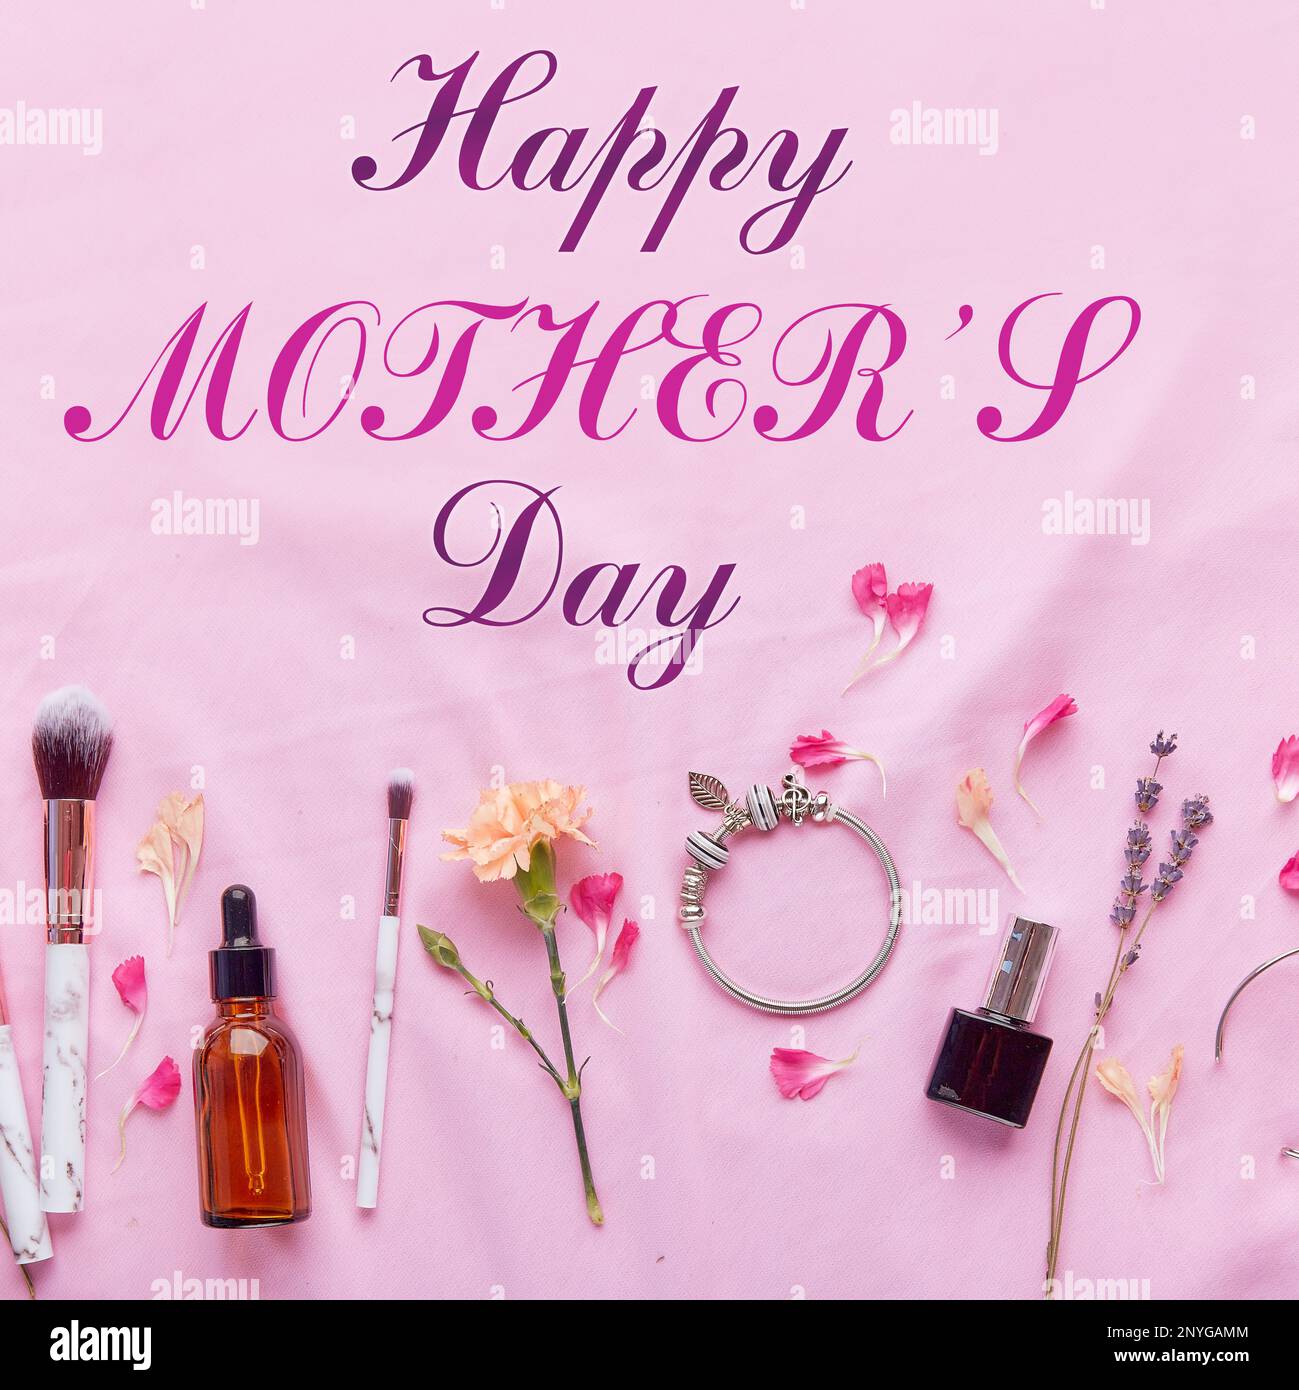 Happy Mothers Day text postcard with accessories and cosmetics among petals. Stock Photo